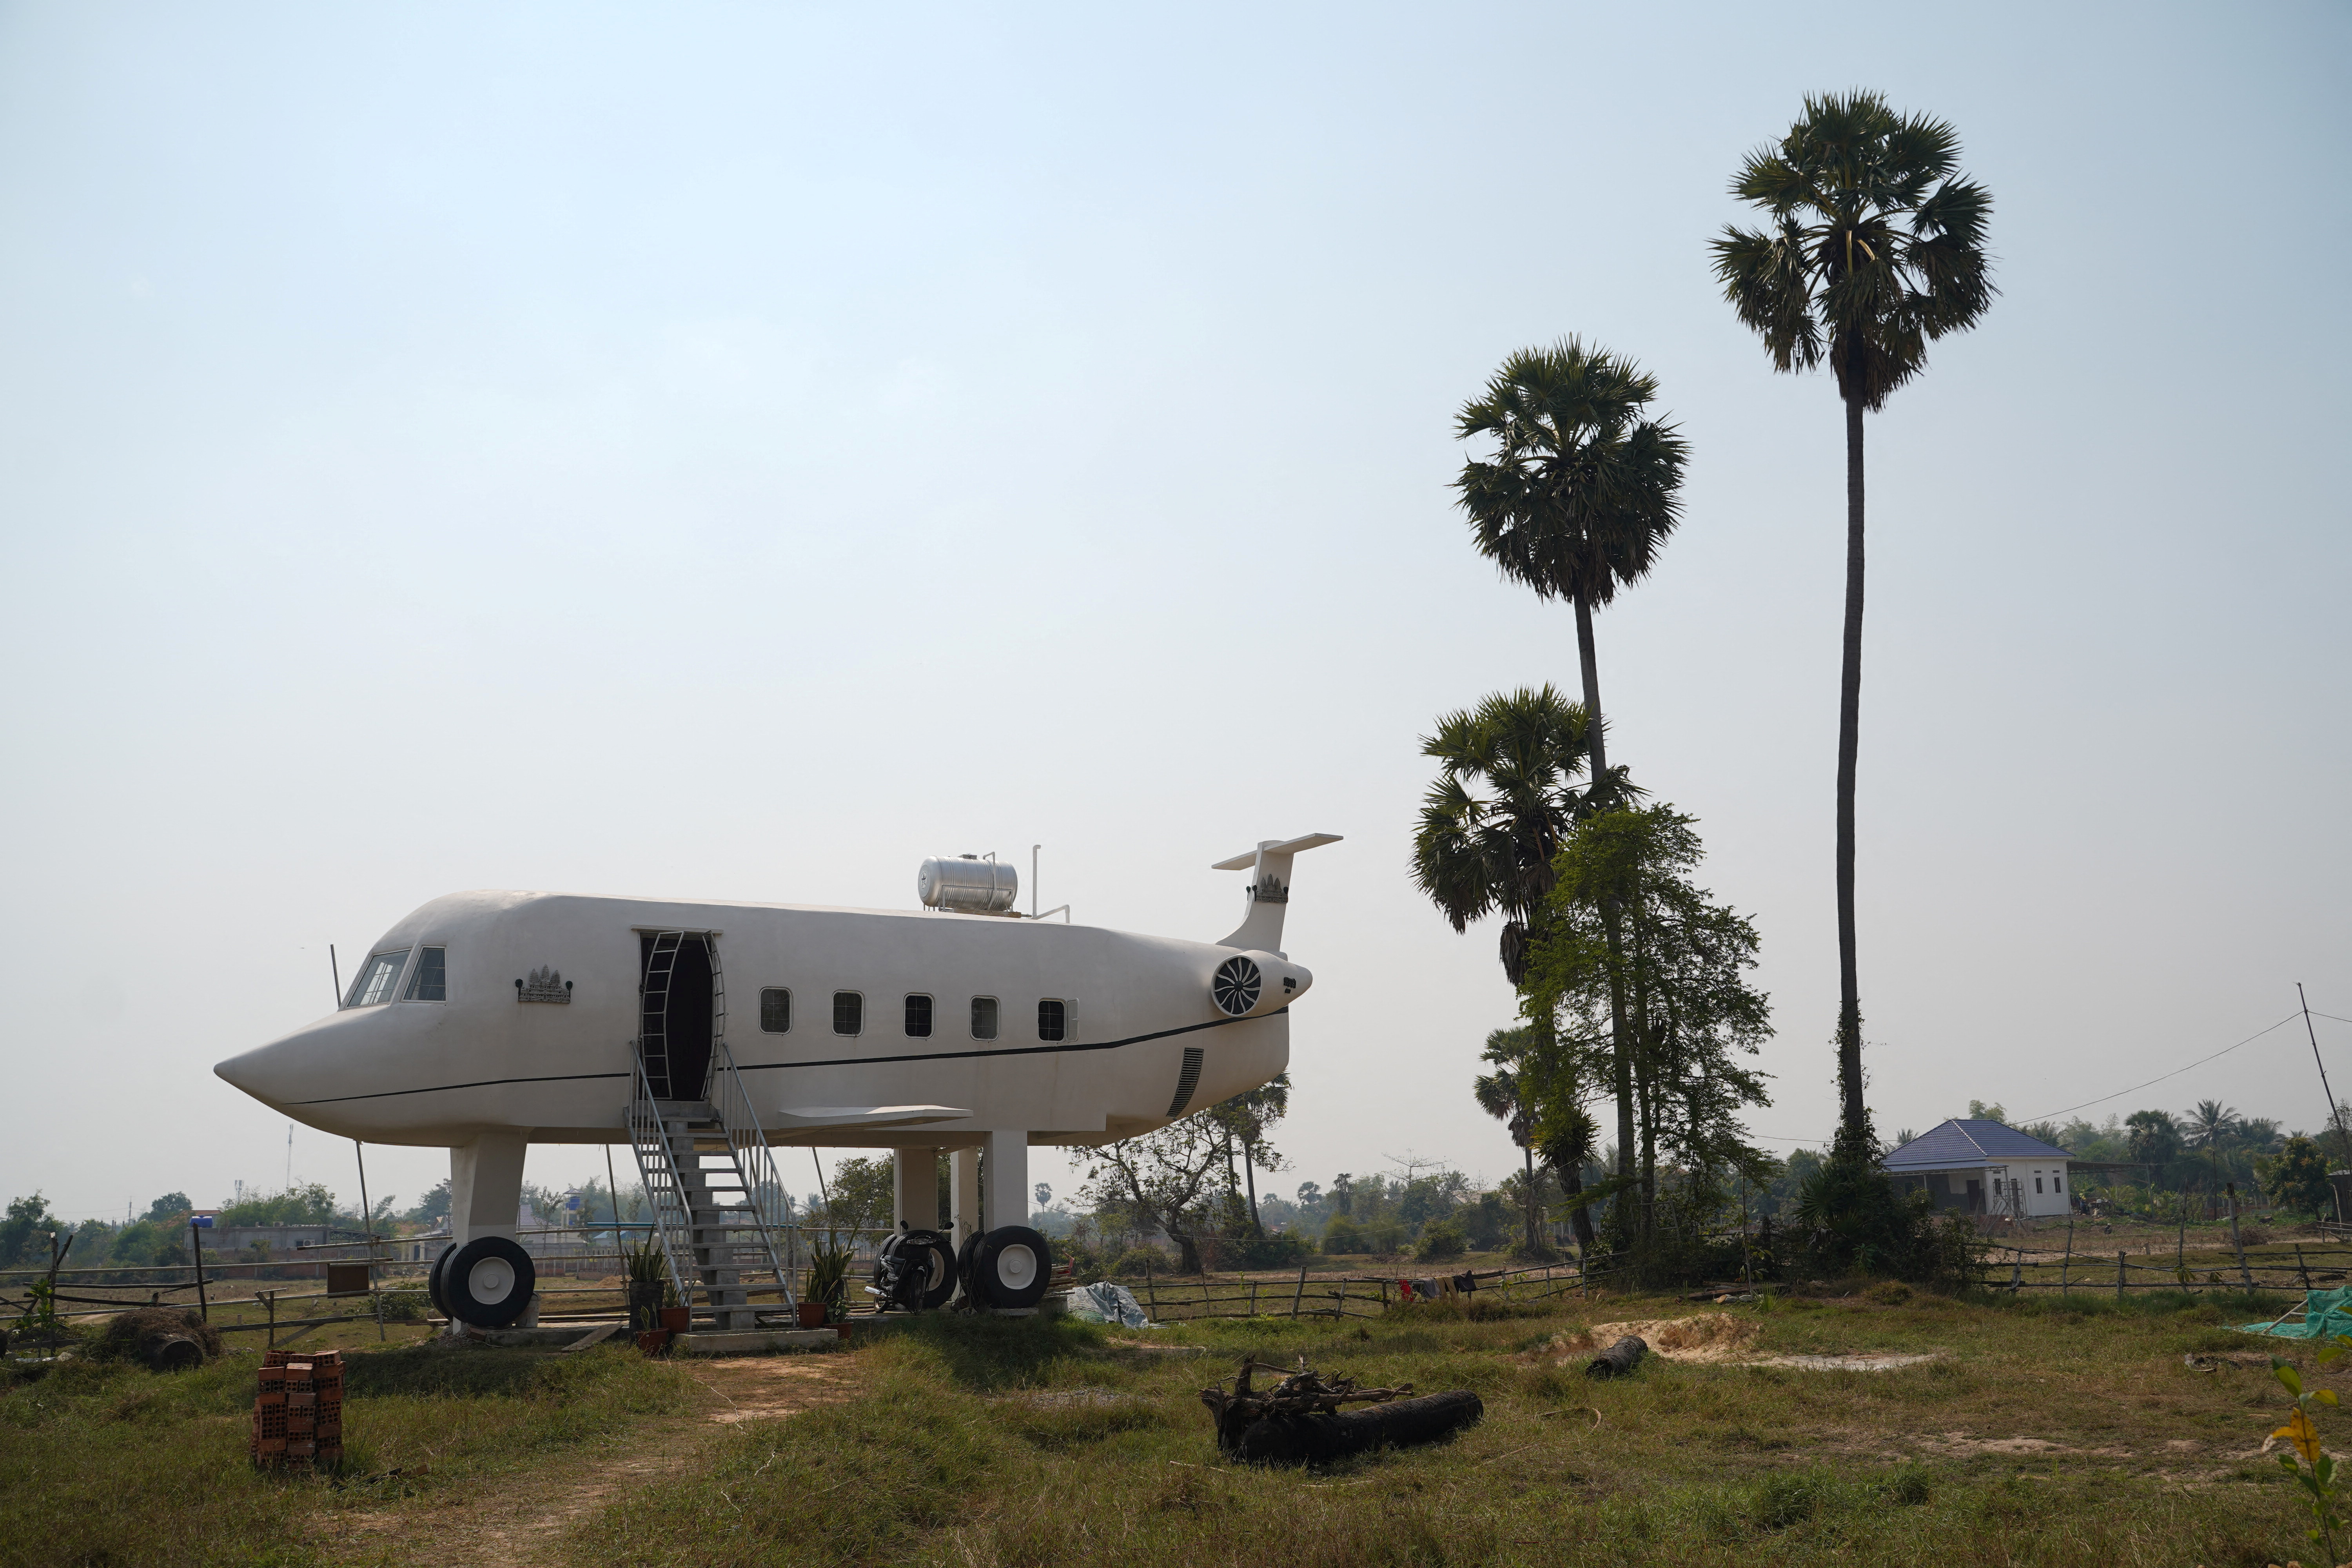 Cambodian man fullfills unfinished dream of flying with airplane house